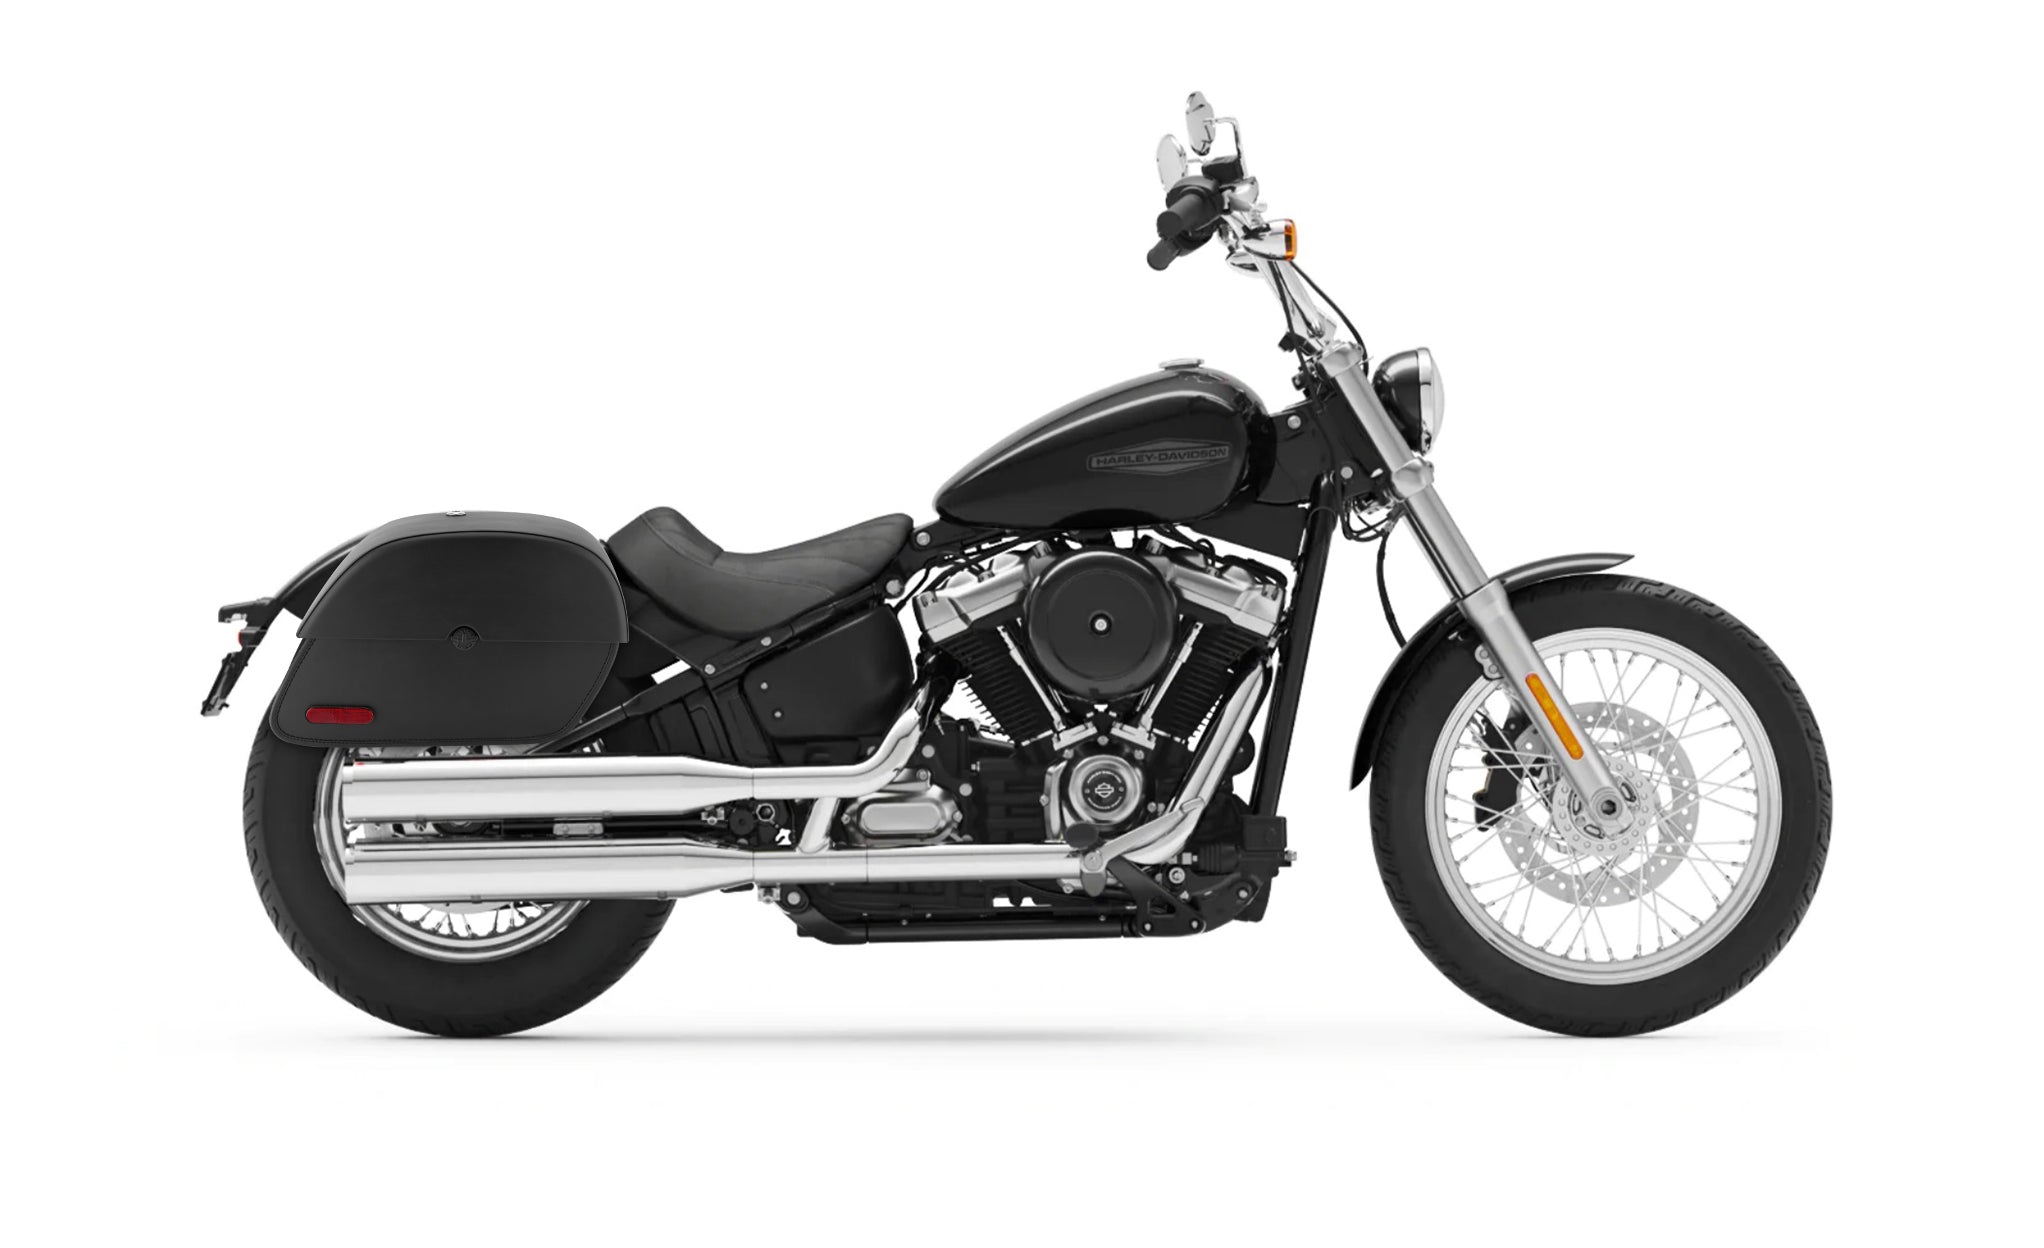 28L - Panzer Medium Quick Mount Leather Saddlebags For Harley Softail Standard FXST @expand